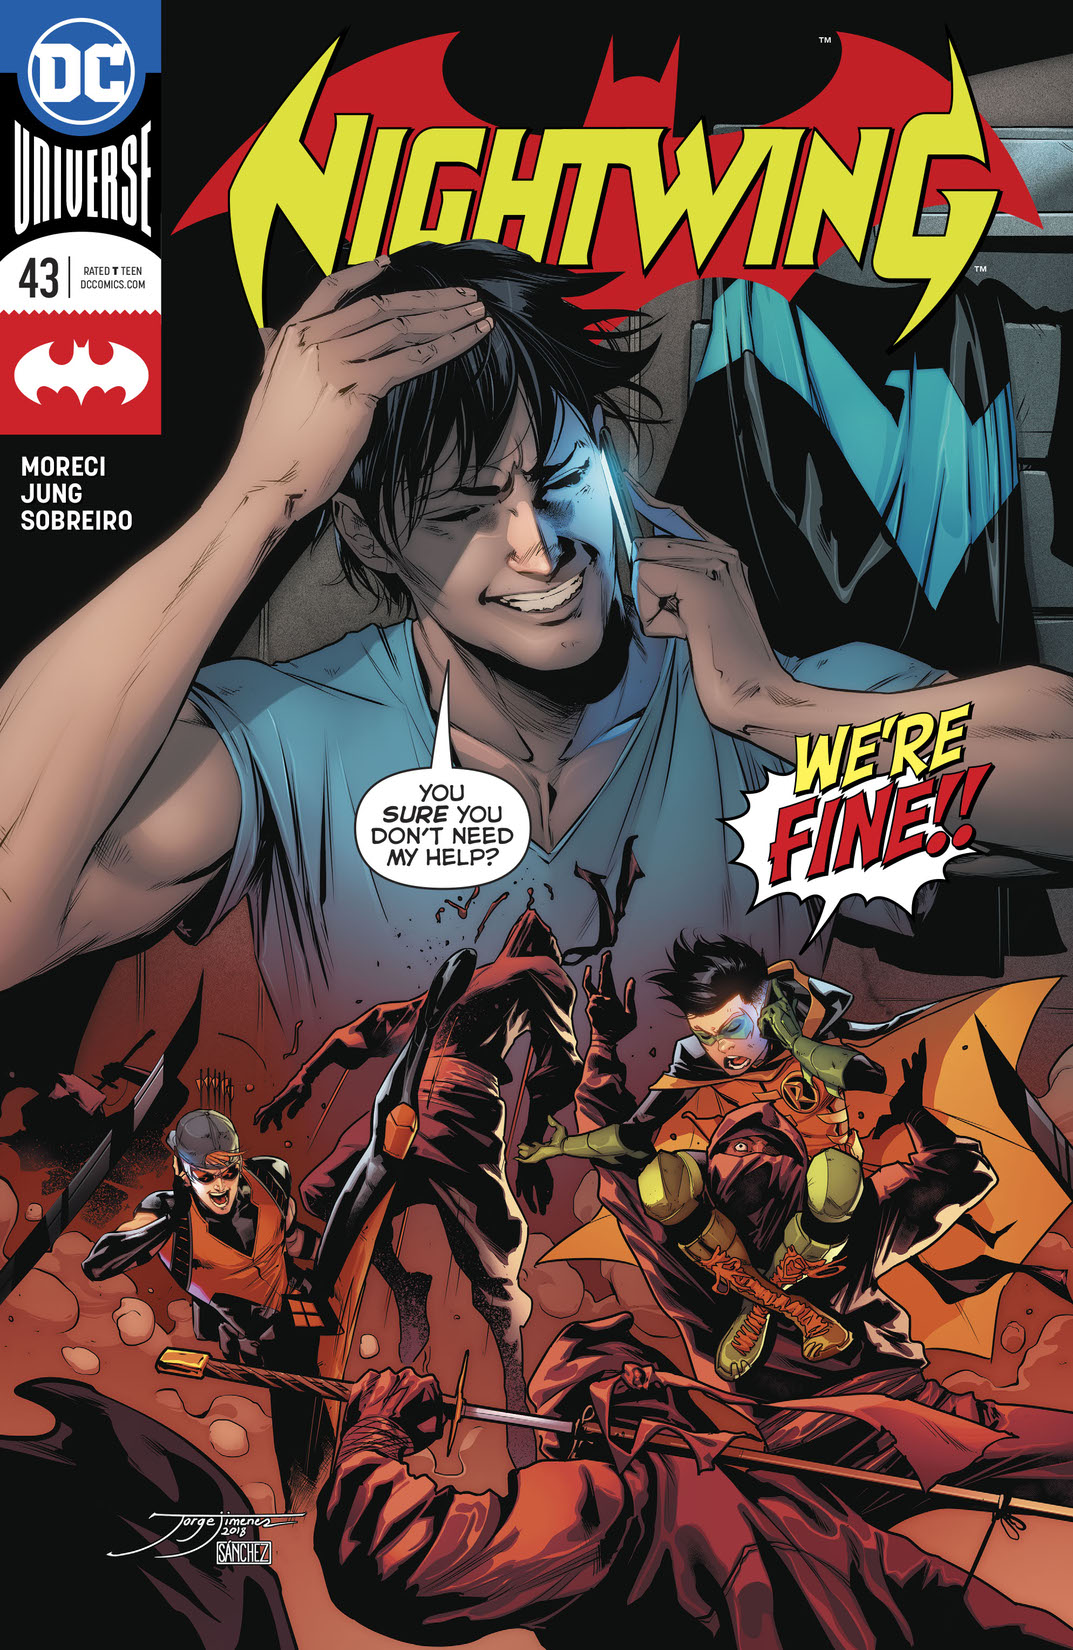 Nightwing (2016-) #43 preview images